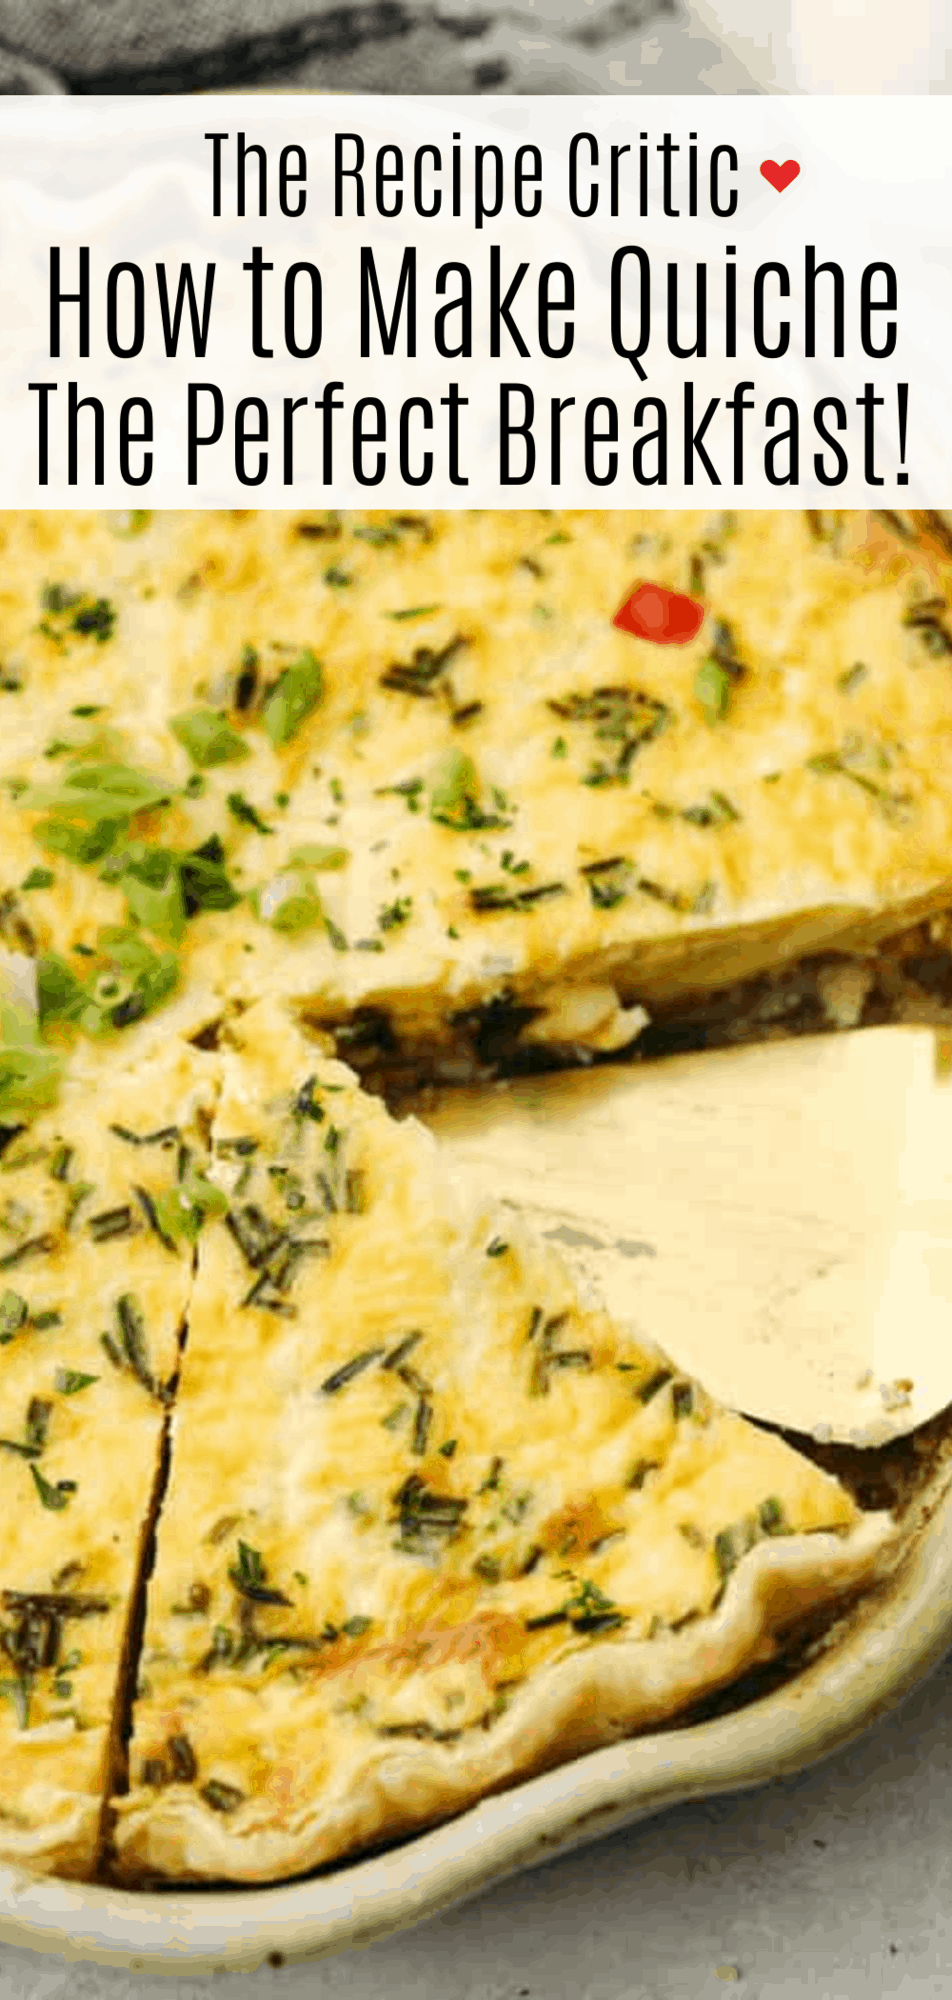 How to Make the Best Baked Quiche Recipe